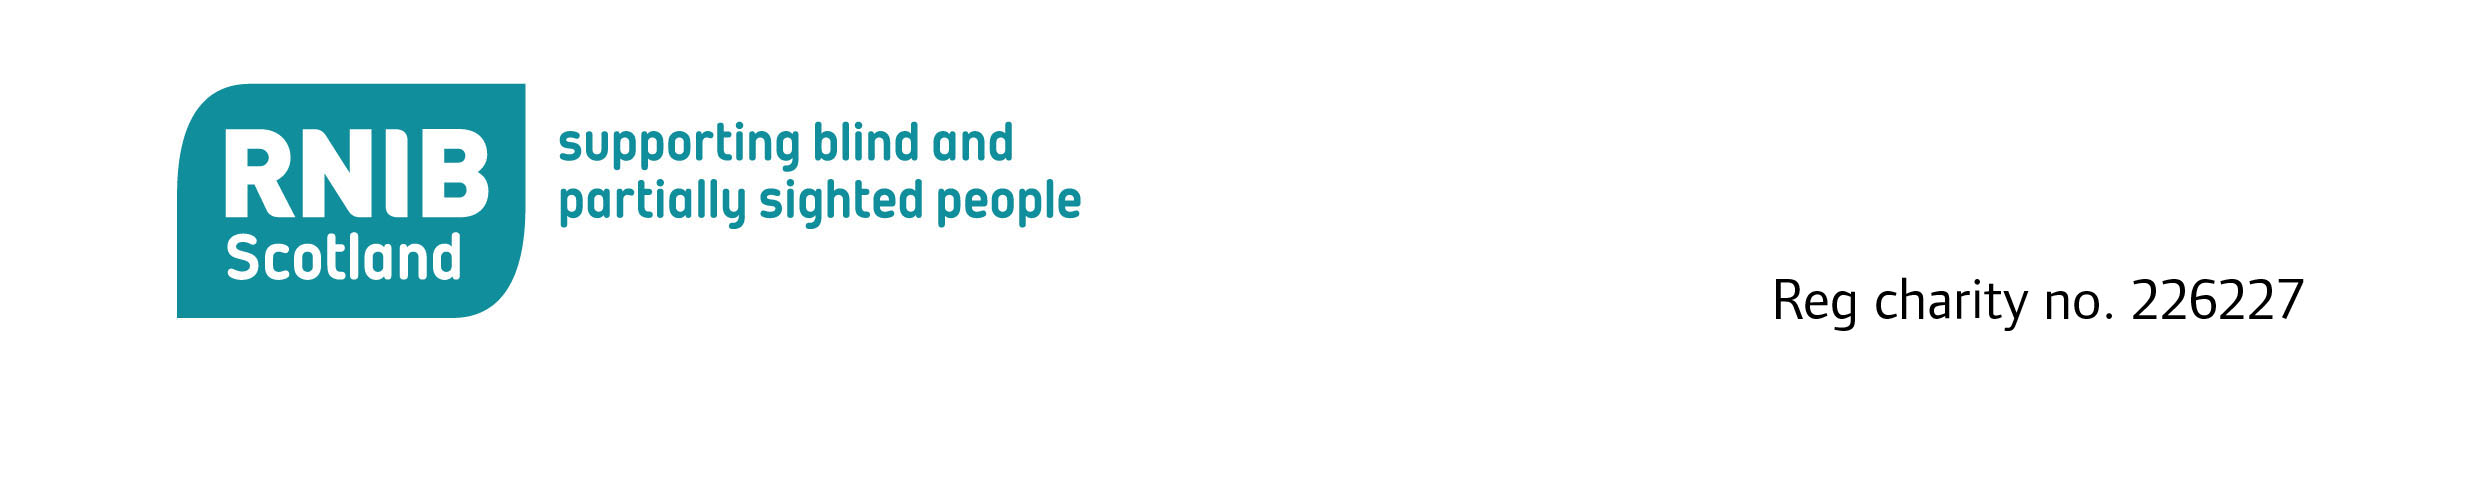 logo rnib scotland supporting blind and partially sighted people registered charity number 226227